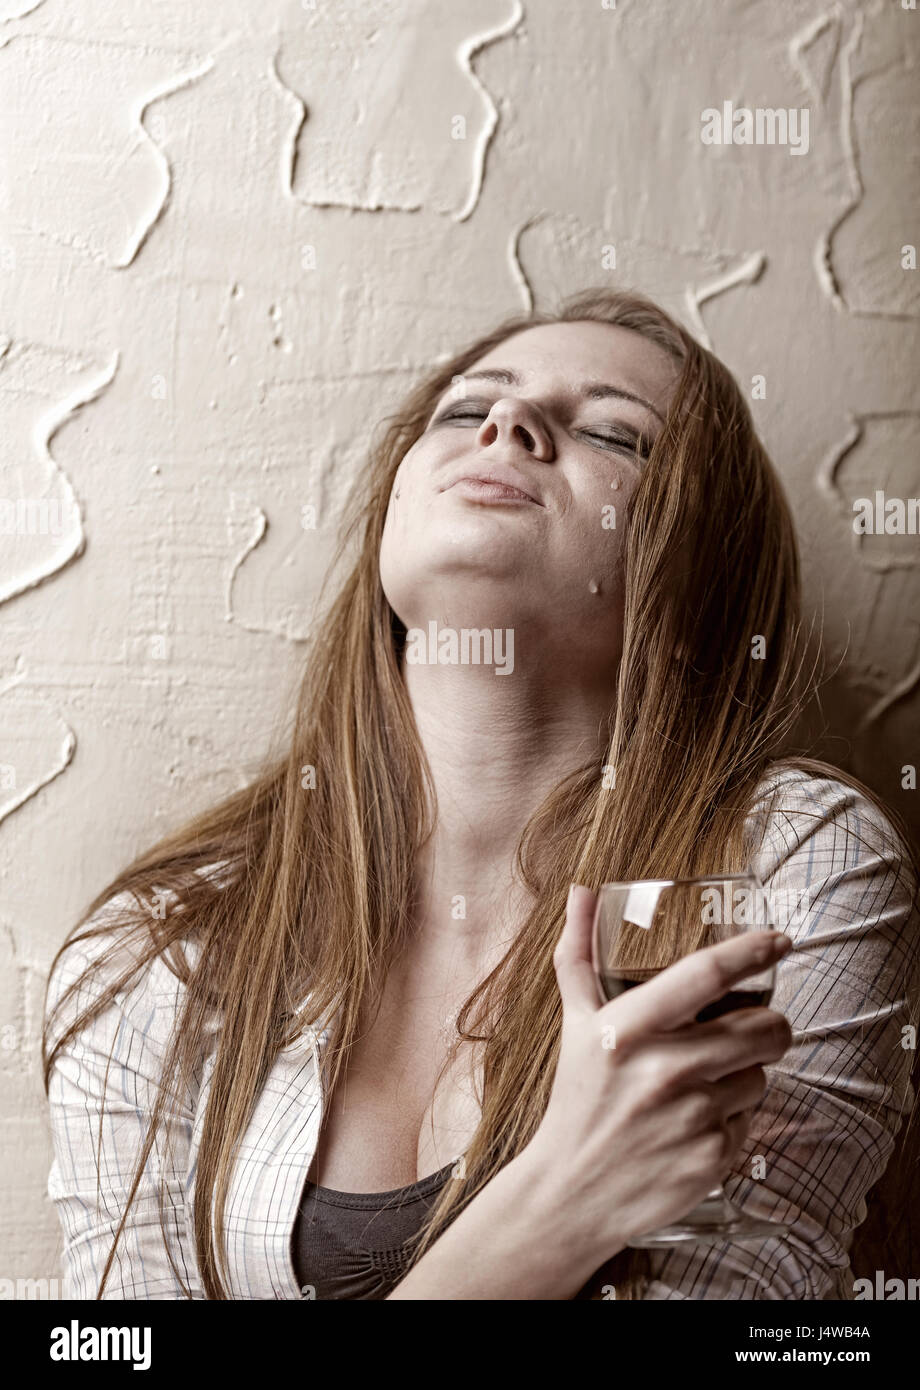 Young crying woman with a glass of wine Stock Photo